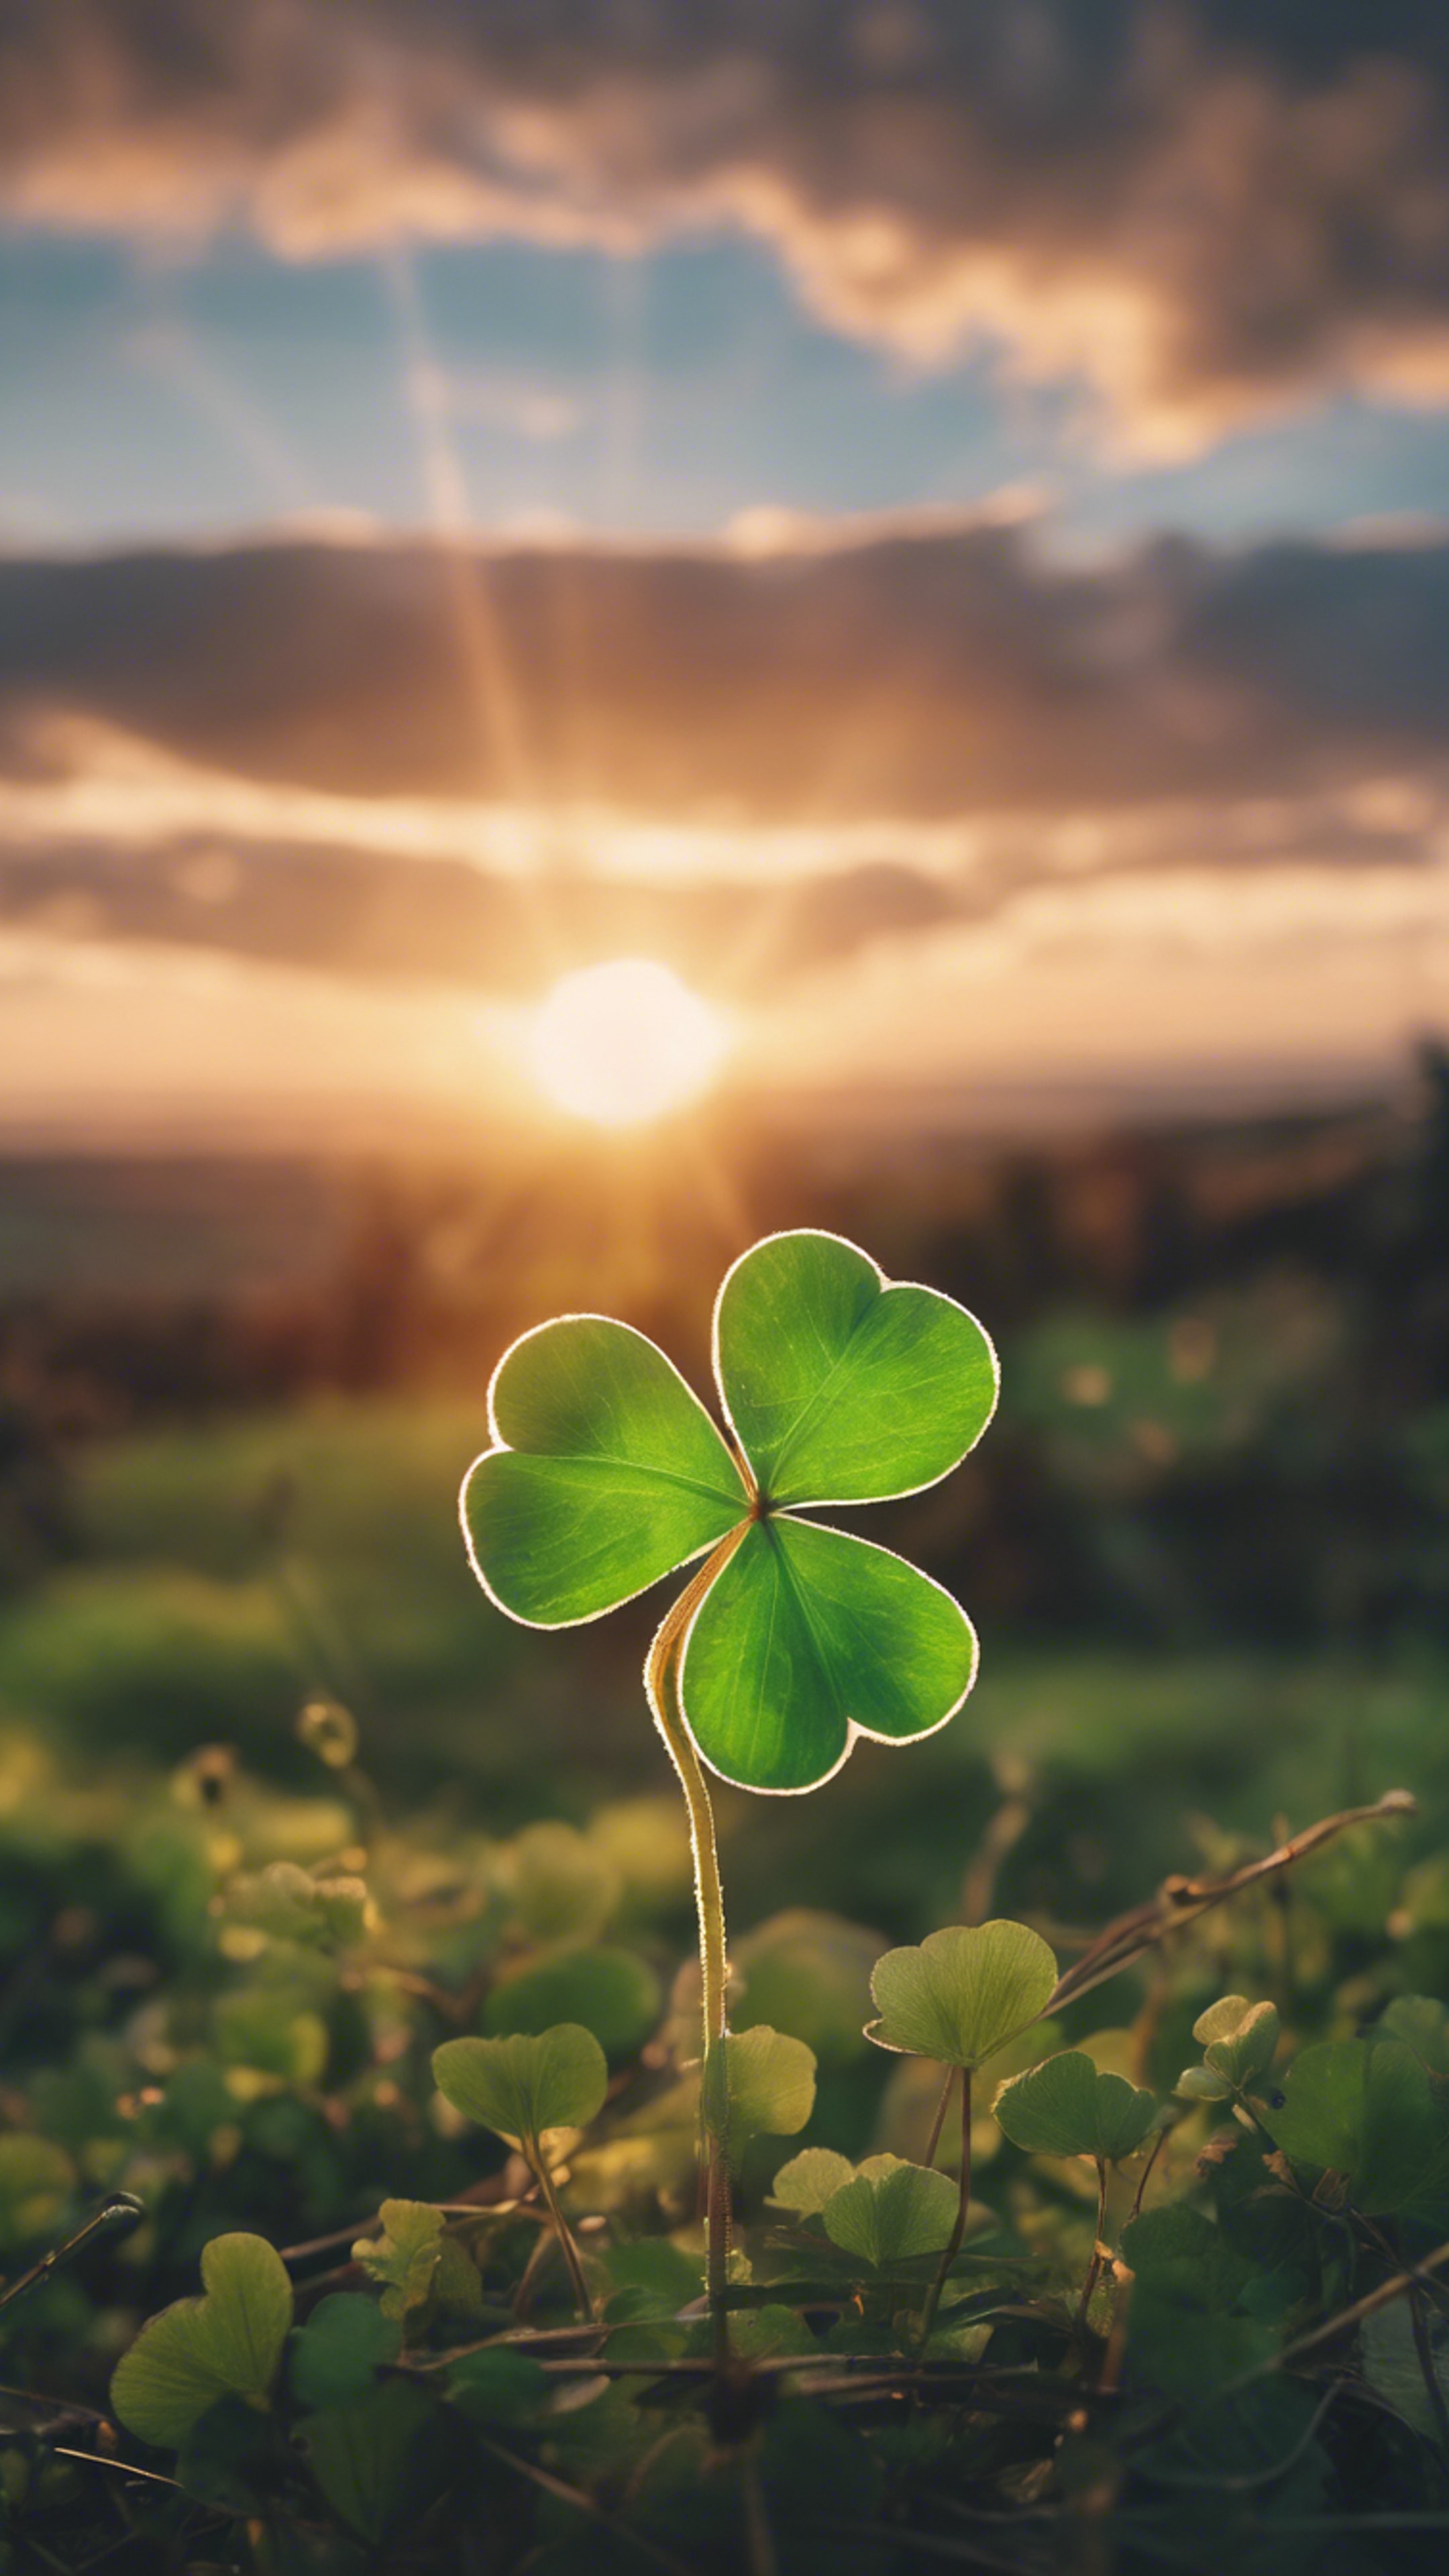 An enchanting sunset over the Irish countryside with a four-leaf clover in the foreground on St. Patrick's Day. วอลล์เปเปอร์[4ad1db603cc8494da5b1]